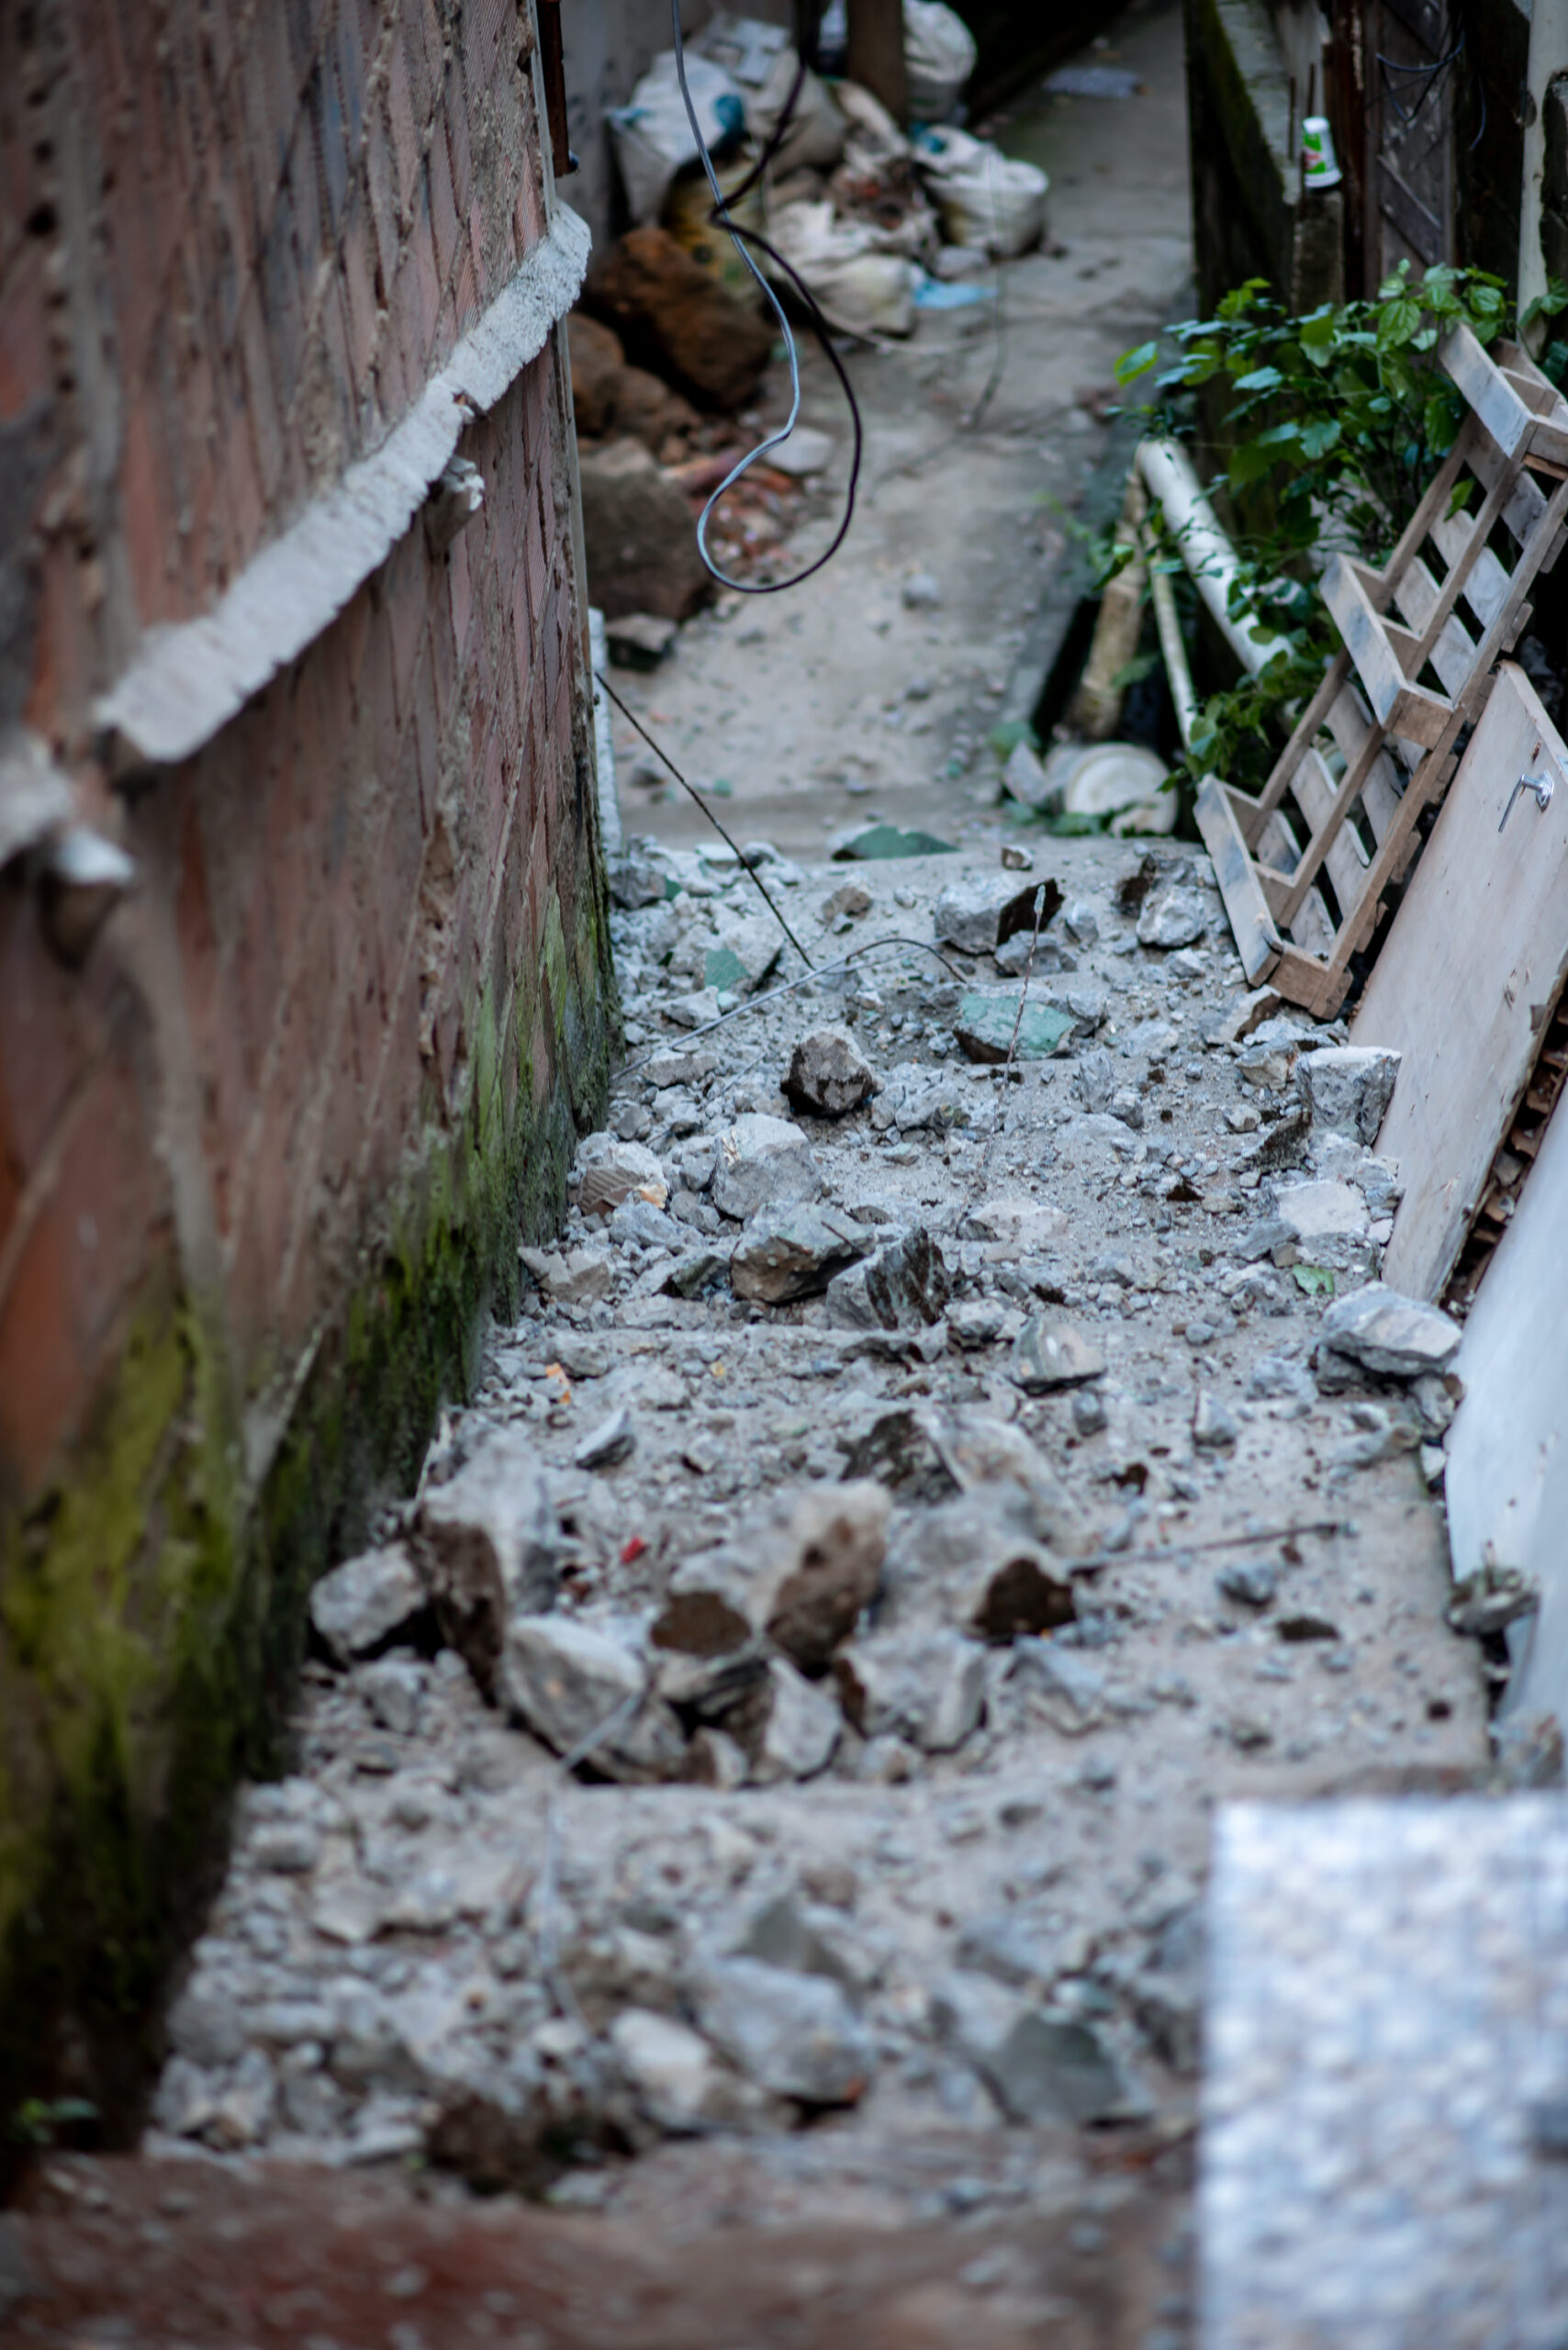 Rubble from houses being demolished on a walkway in Jaqueira, Vidigal. Photo: Igor Albuquerque